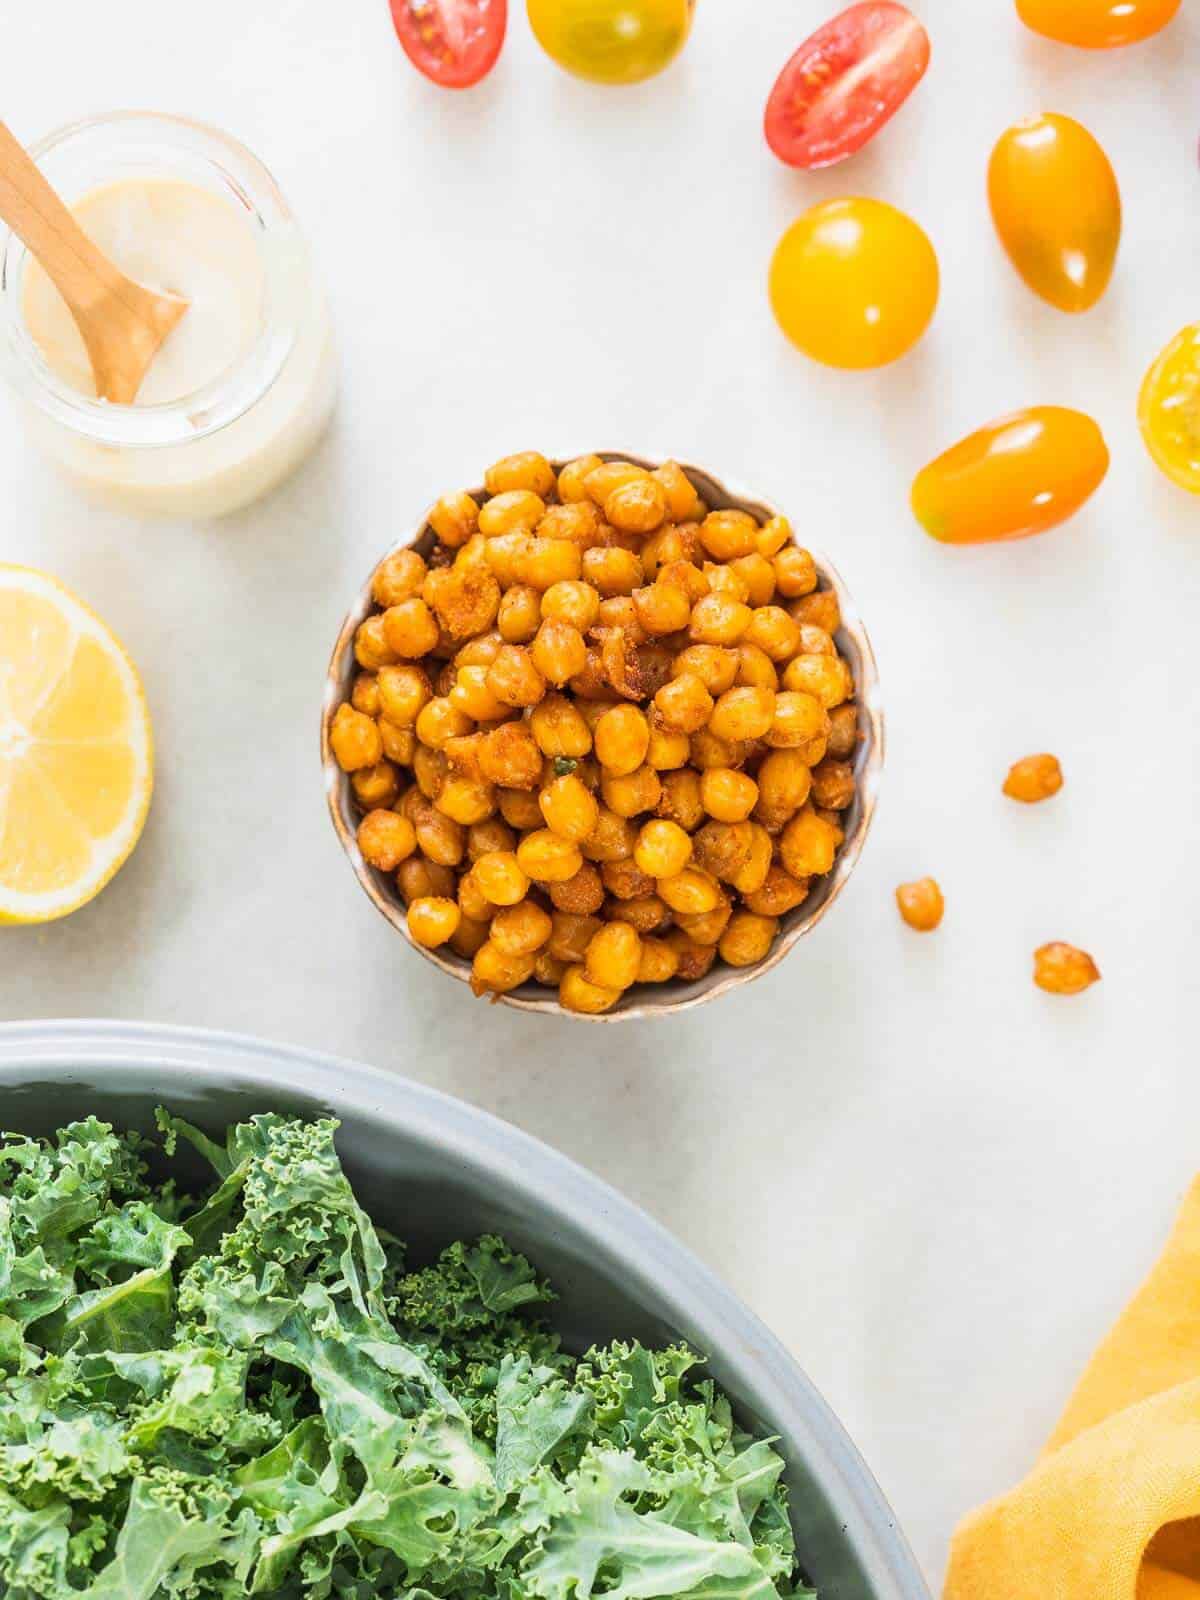 pair roasted chickpeas with your favorite salad components like kale, spinach and grape tomatoes.